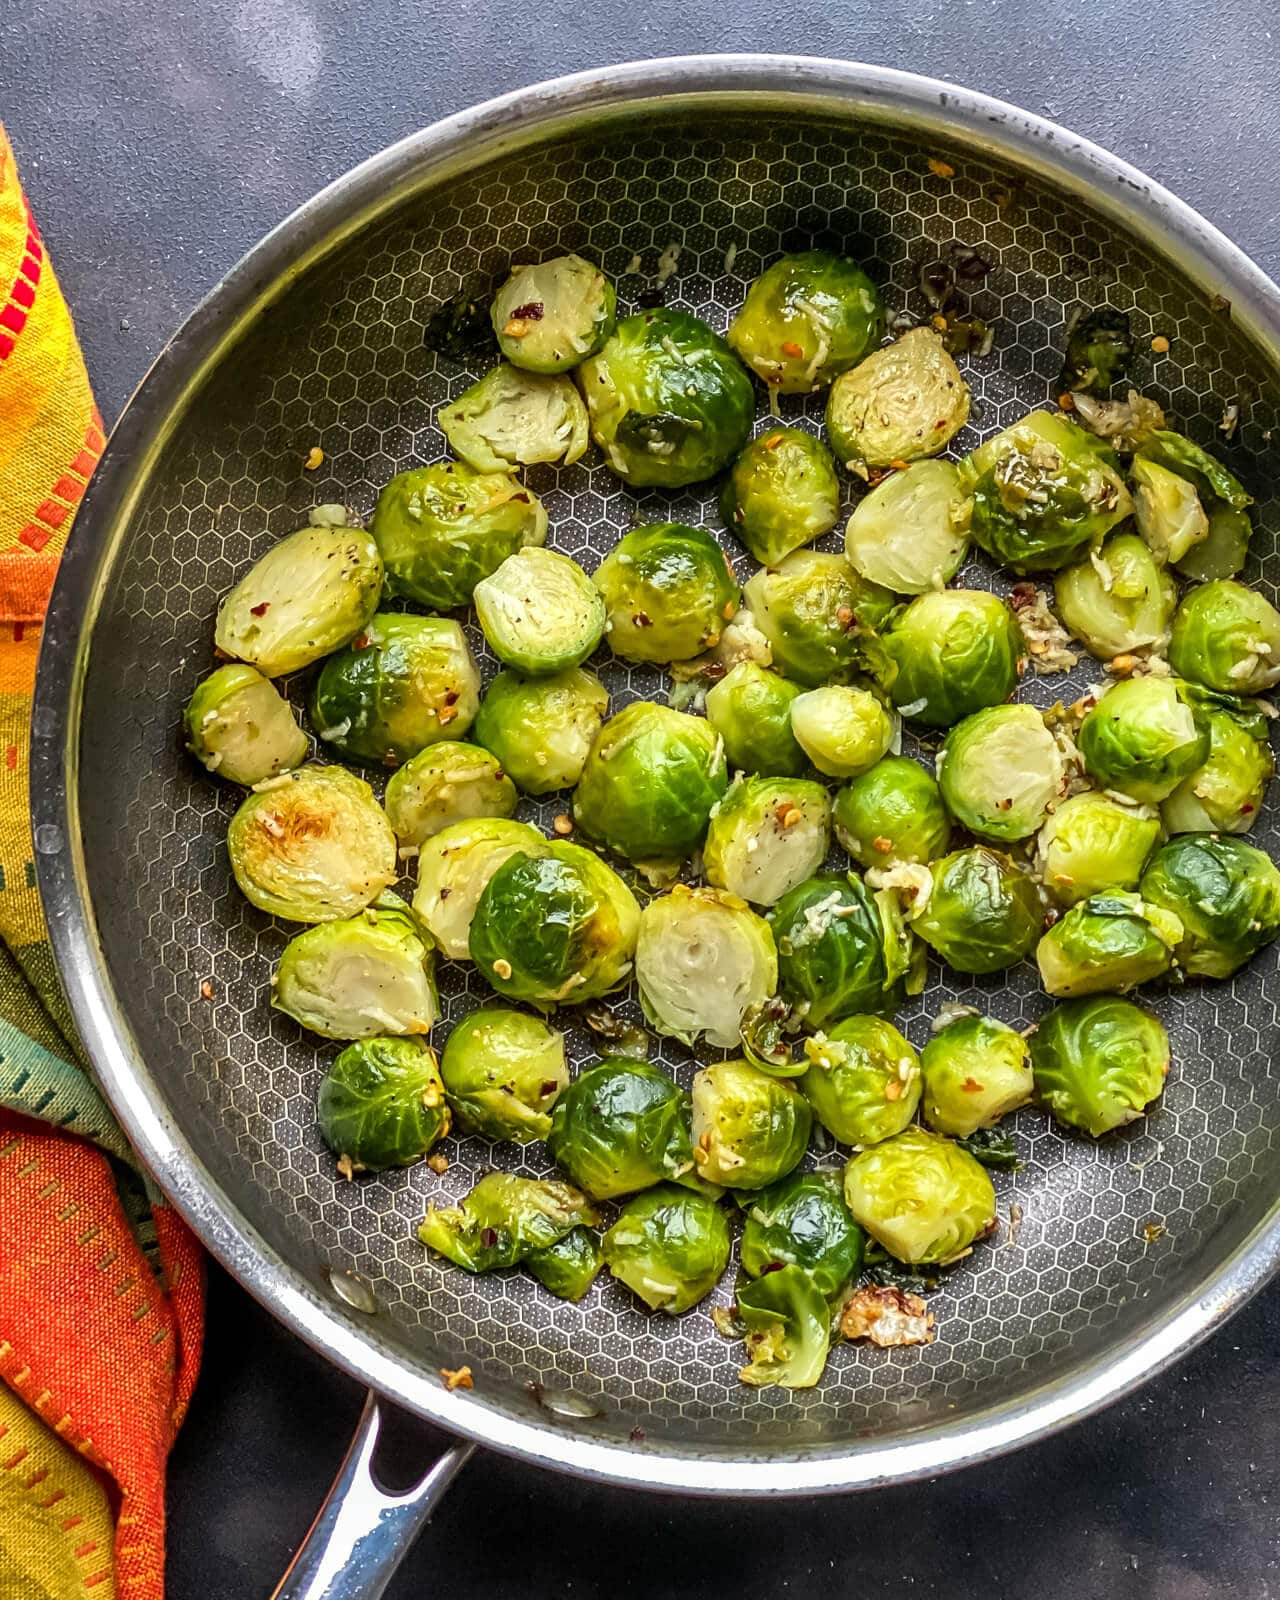 A silver pan of pan fried steamed Brussel sprouts on a grey counter with an orange and yellow towel to the left.